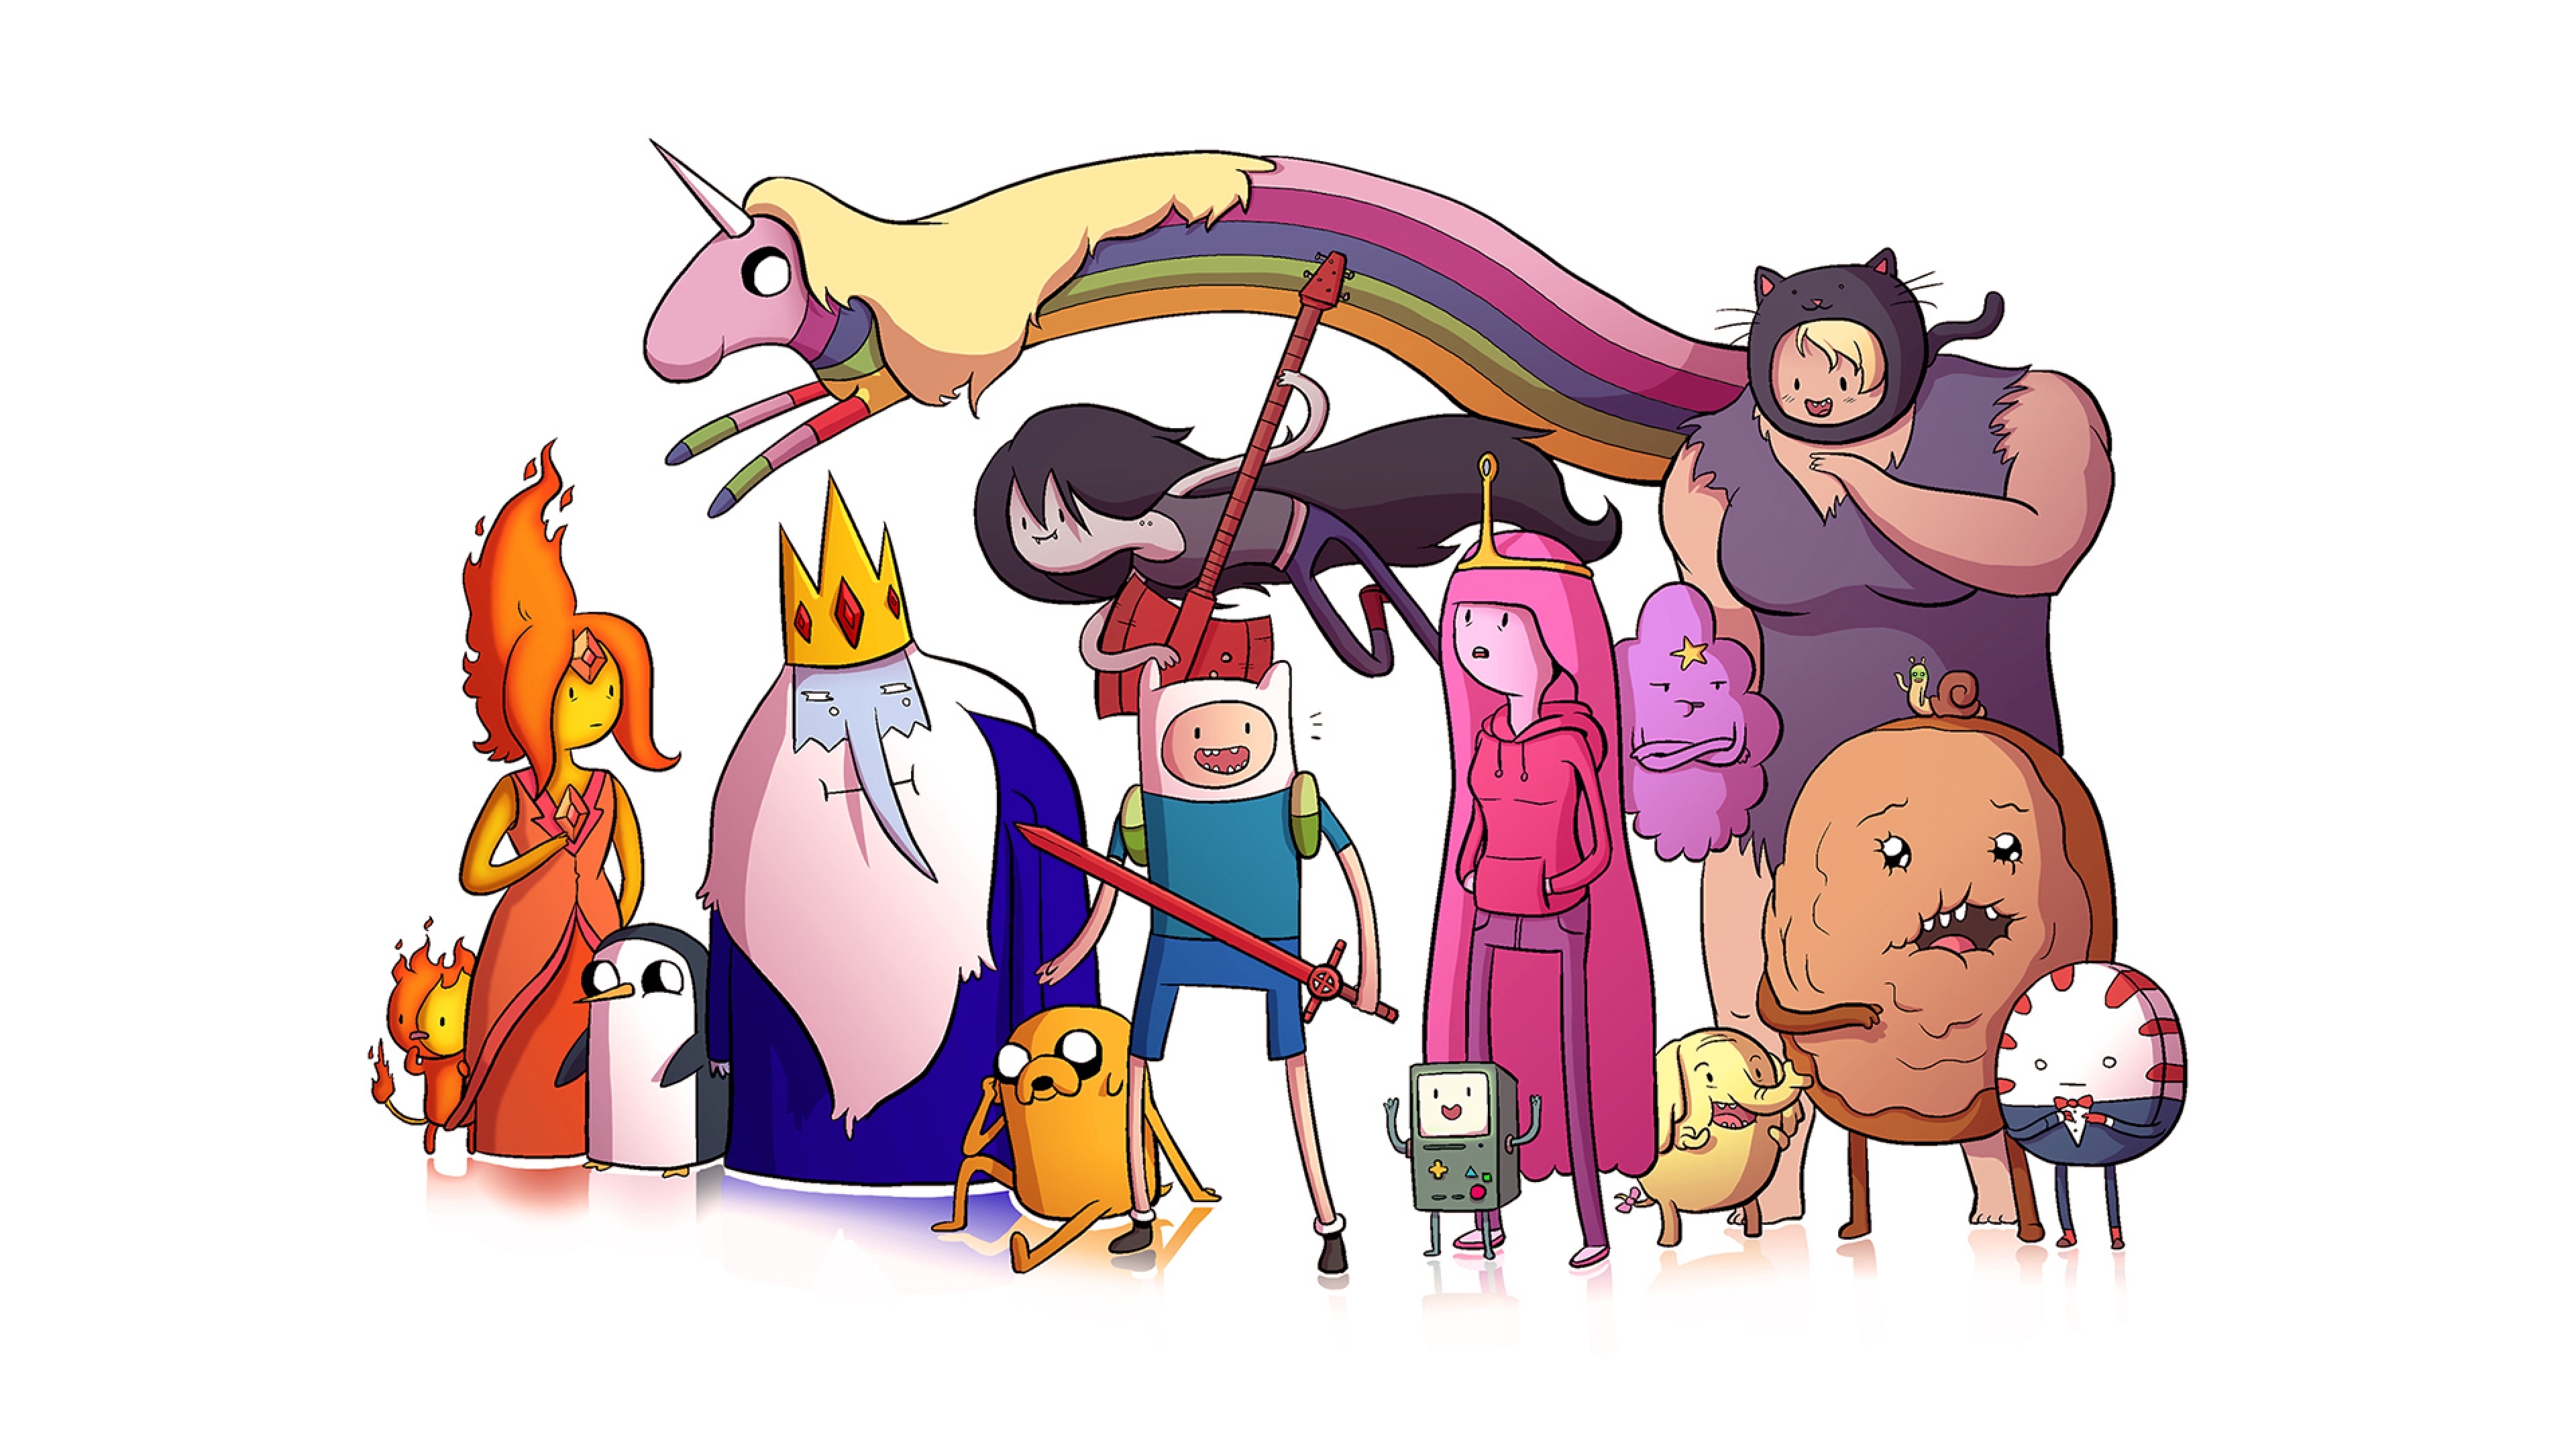 Download Wallpaper 3840x2160 Adventure time with finn & jake ...